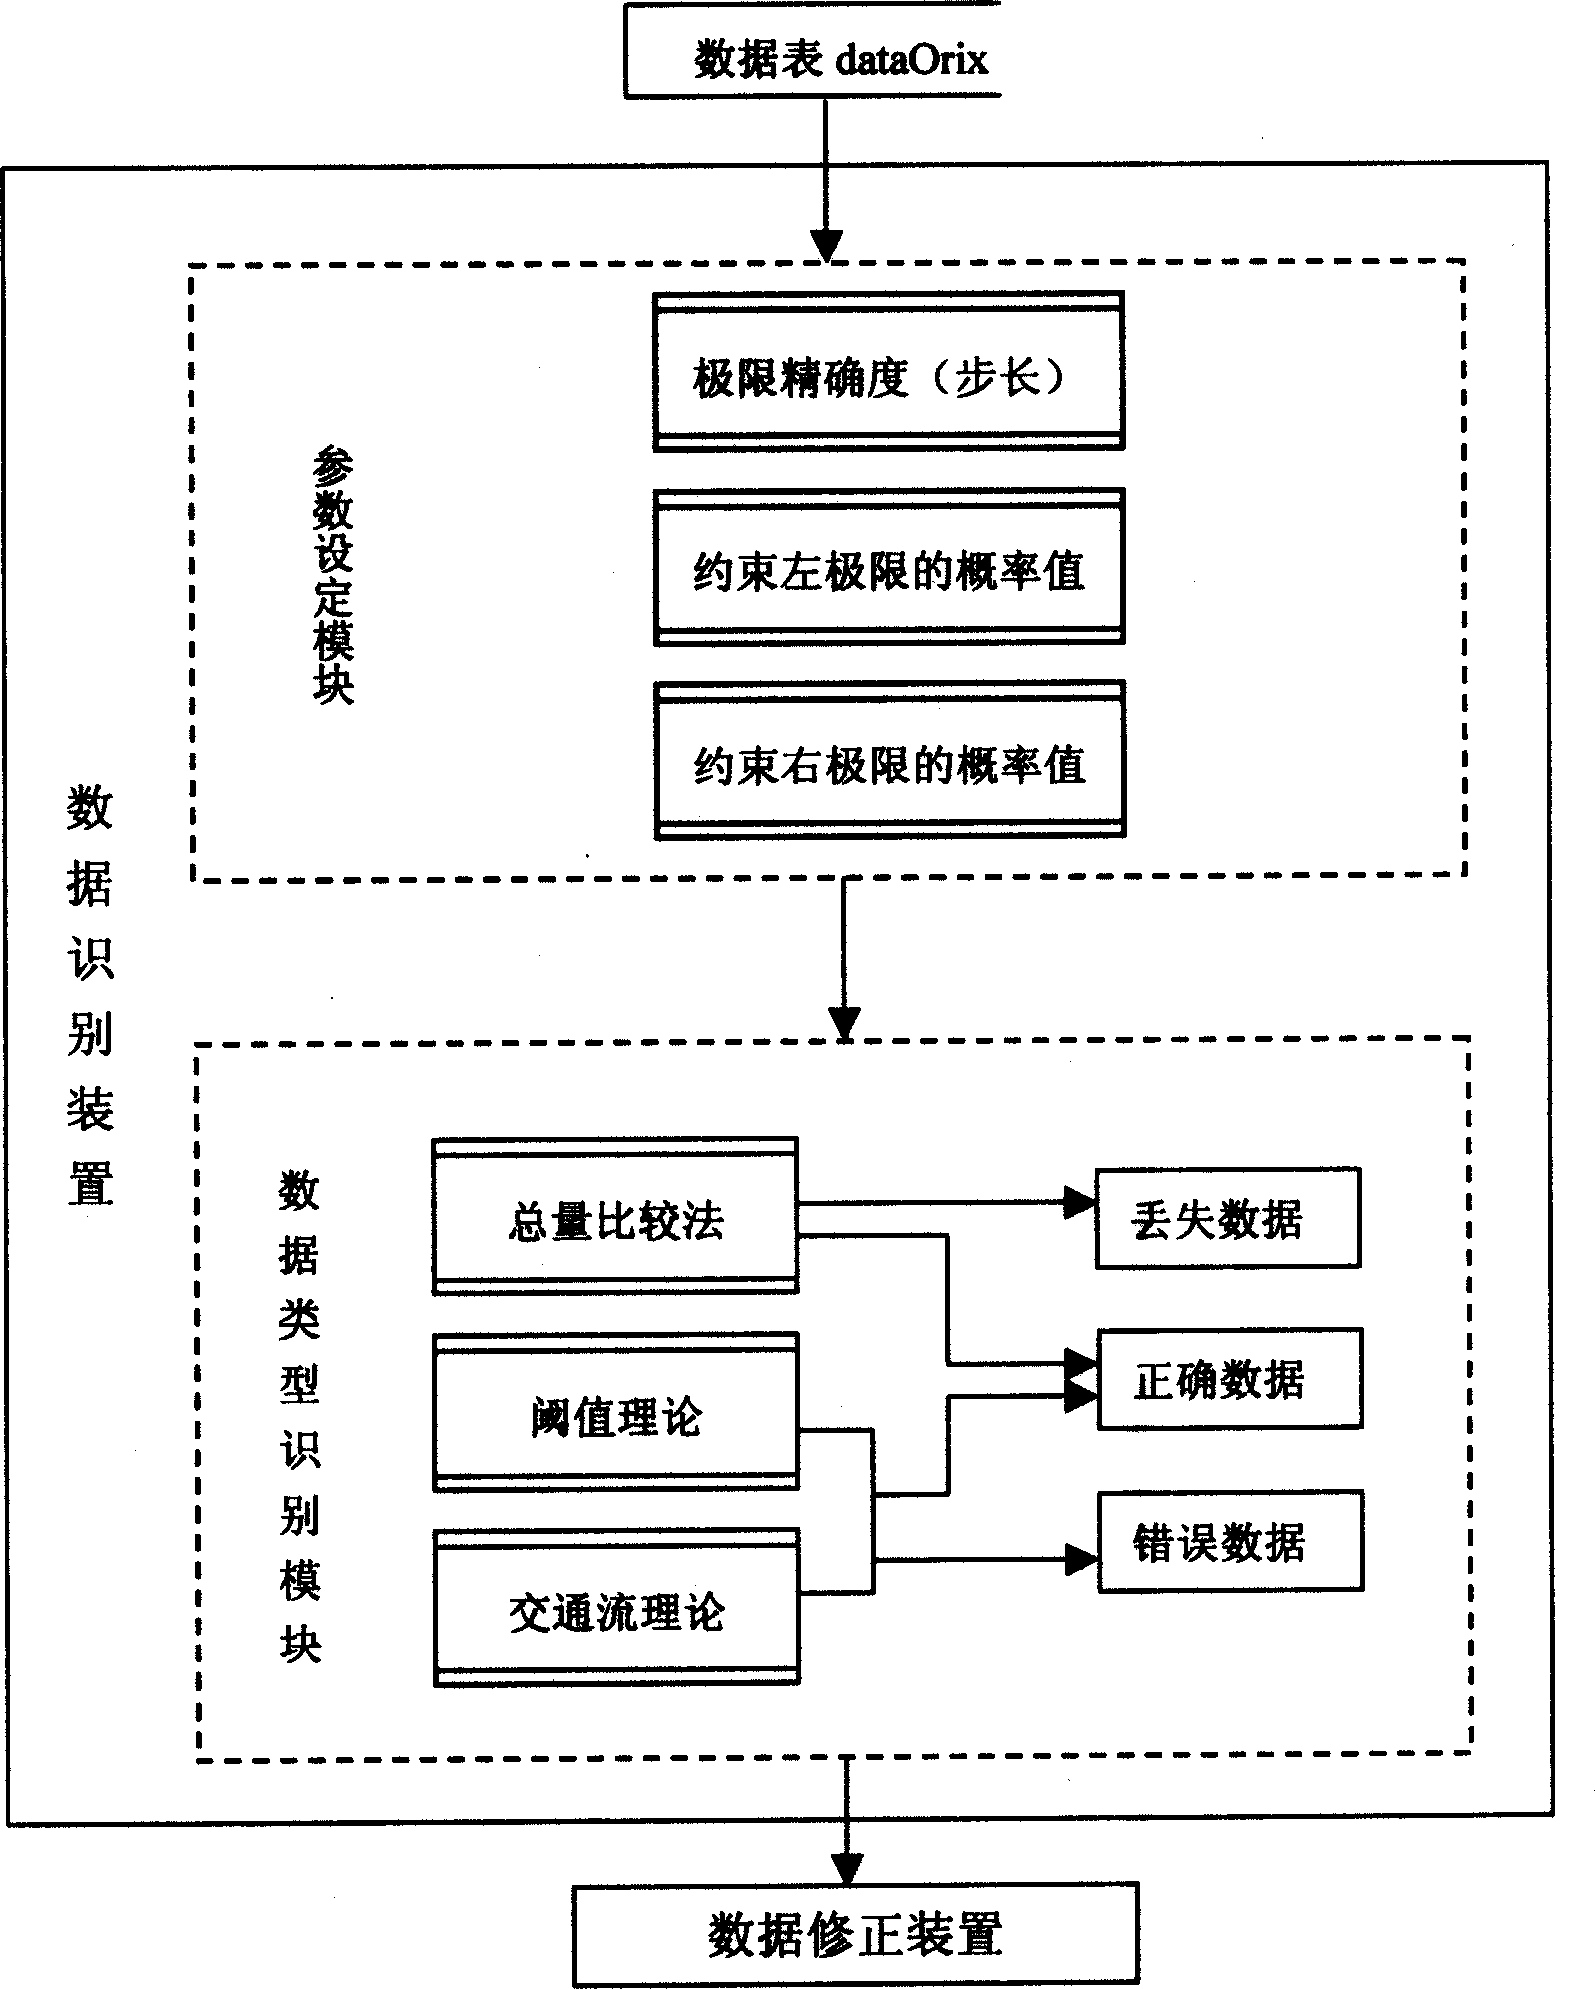 Road traffic flow data quality controlling method and apparatus